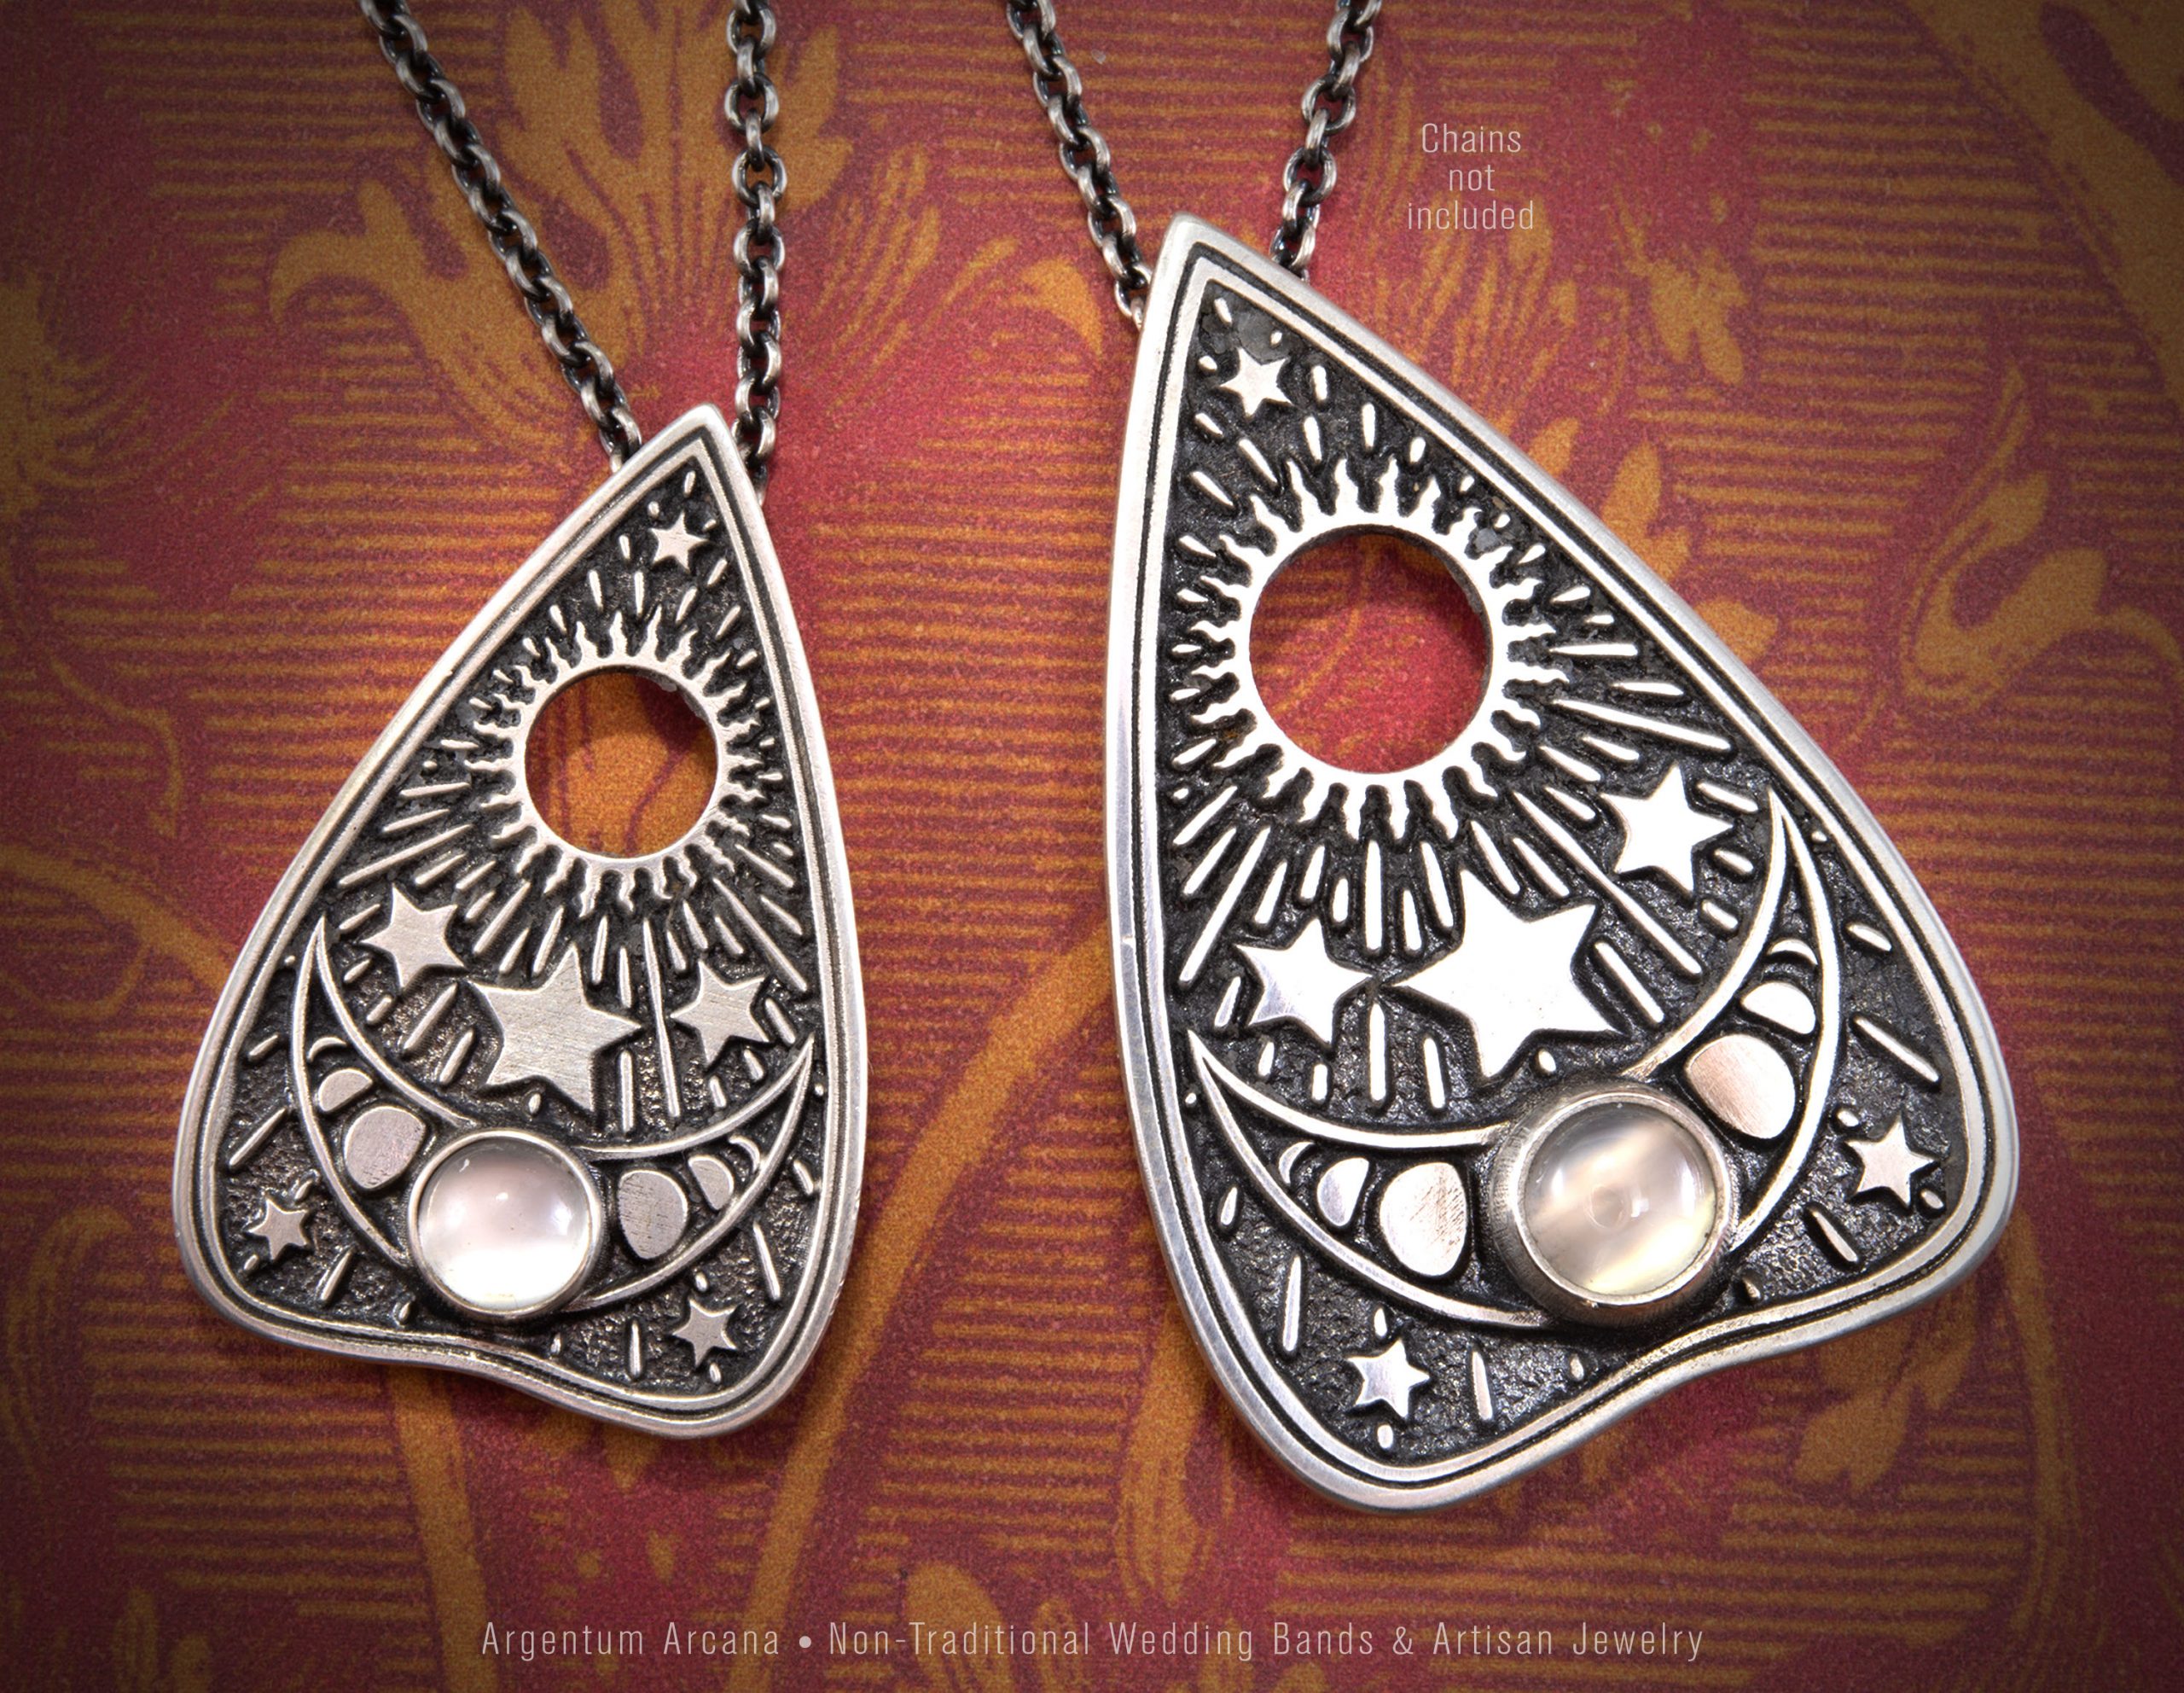 Two Ouija Planchette Pendant Necklaces with a witchy moon phase design with a natural moonstone gem